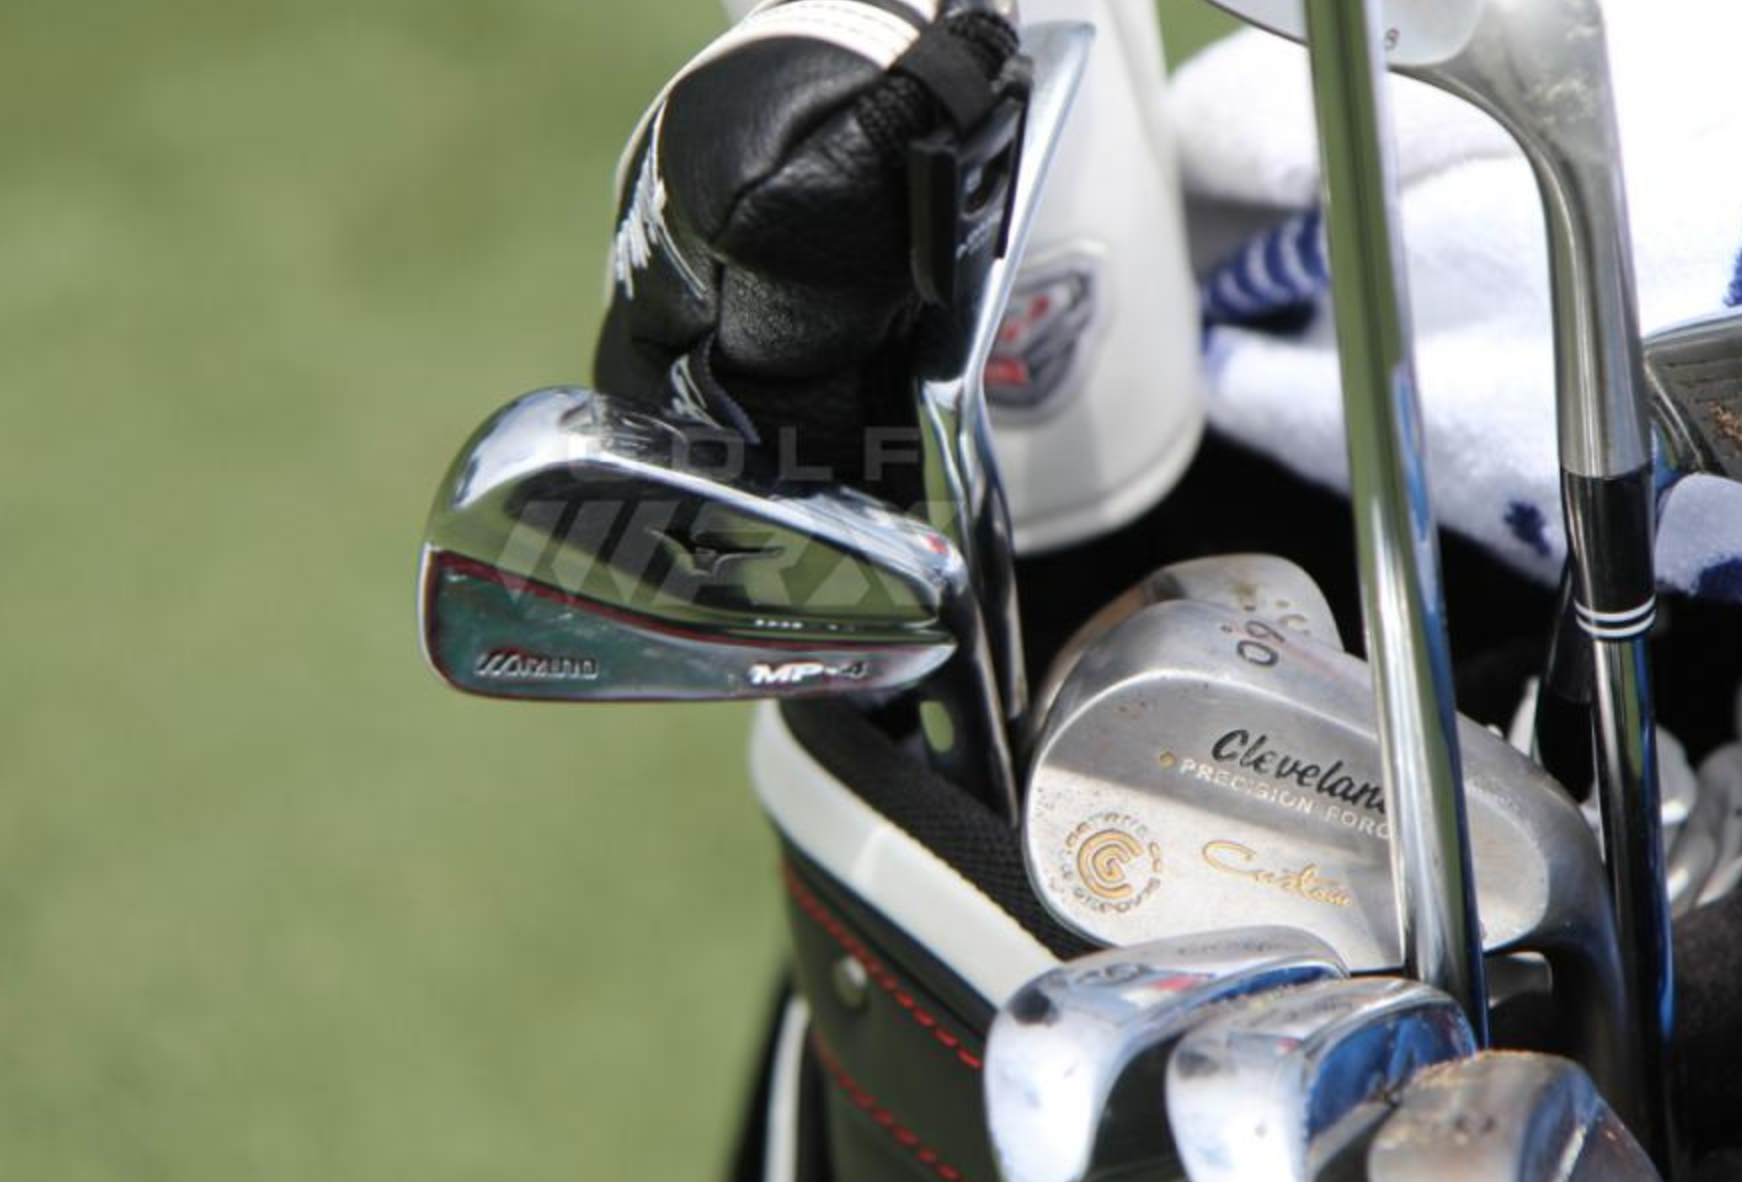 WITB Time Machine: Steven Bowditch's winning WITB at the 2015 AT&T